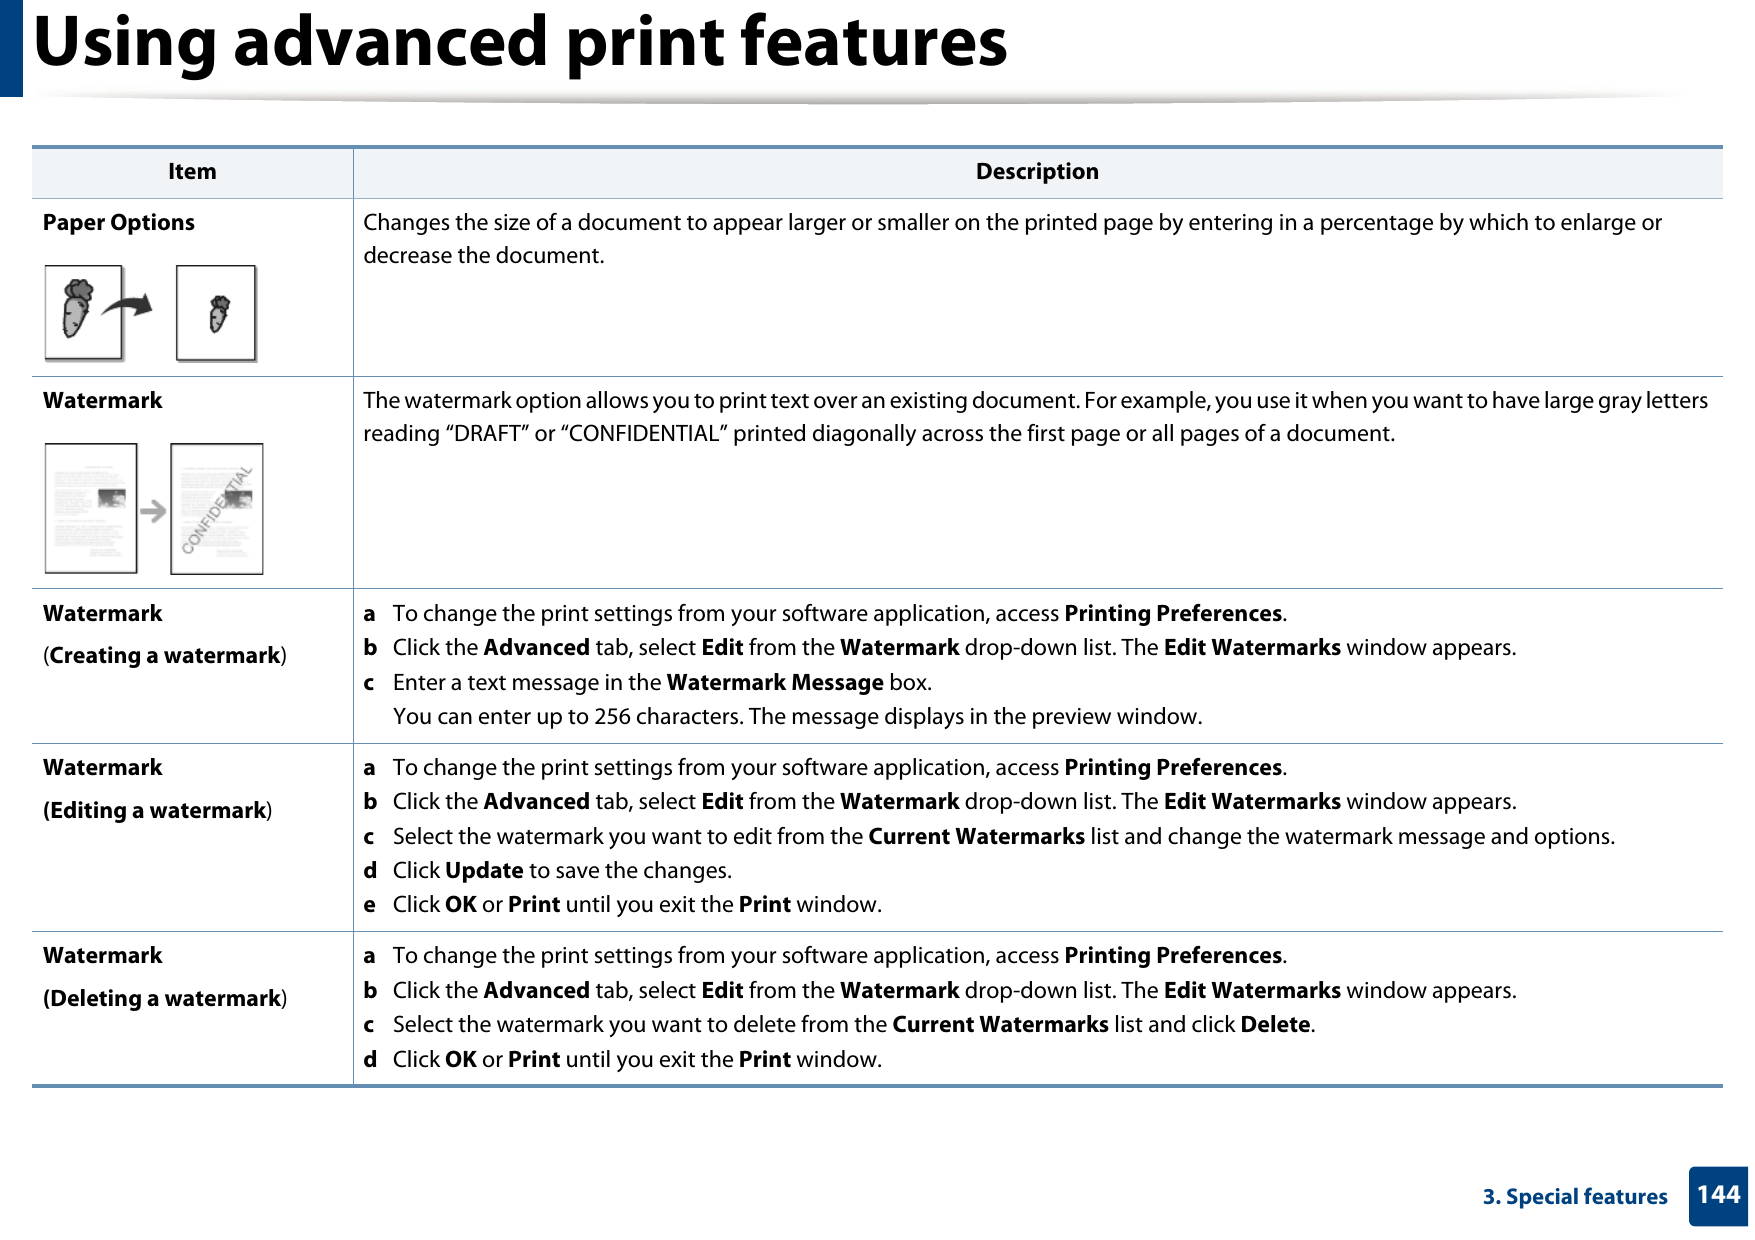 Using advanced print features1443. Special featuresPaper Options Changes the size of a document to appear larger or smaller on the printed page by entering in a percentage by which to enlarge or decrease the document.Watermark The watermark option allows you to print text over an existing document. For example, you use it when you want to have large gray letters reading “DRAFT” or “CONFIDENTIAL” printed diagonally across the first page or all pages of a document. Watermark(Creating a watermark)a  To change the print settings from your software application, access Printing Preferences.b  Click the Advanced tab, select Edit from the Watermark drop-down list. The Edit Watermarks window appears.c  Enter a text message in the Watermark Message box. You can enter up to 256 characters. The message displays in the preview window.Watermark(Editing a watermark)a  To change the print settings from your software application, access Printing Preferences.b  Click the Advanced tab, select Edit from the Watermark drop-down list. The Edit Watermarks window appears. c  Select the watermark you want to edit from the Current Watermarks list and change the watermark message and options. d  Click Update to save the changes.e  Click OK or Print until you exit the Print window. Watermark(Deleting a watermark)a  To change the print settings from your software application, access Printing Preferences.b  Click the Advanced tab, select Edit from the Watermark drop-down list. The Edit Watermarks window appears. c  Select the watermark you want to delete from the Current Watermarks list and click Delete. d  Click OK or Print until you exit the Print window.Item Description